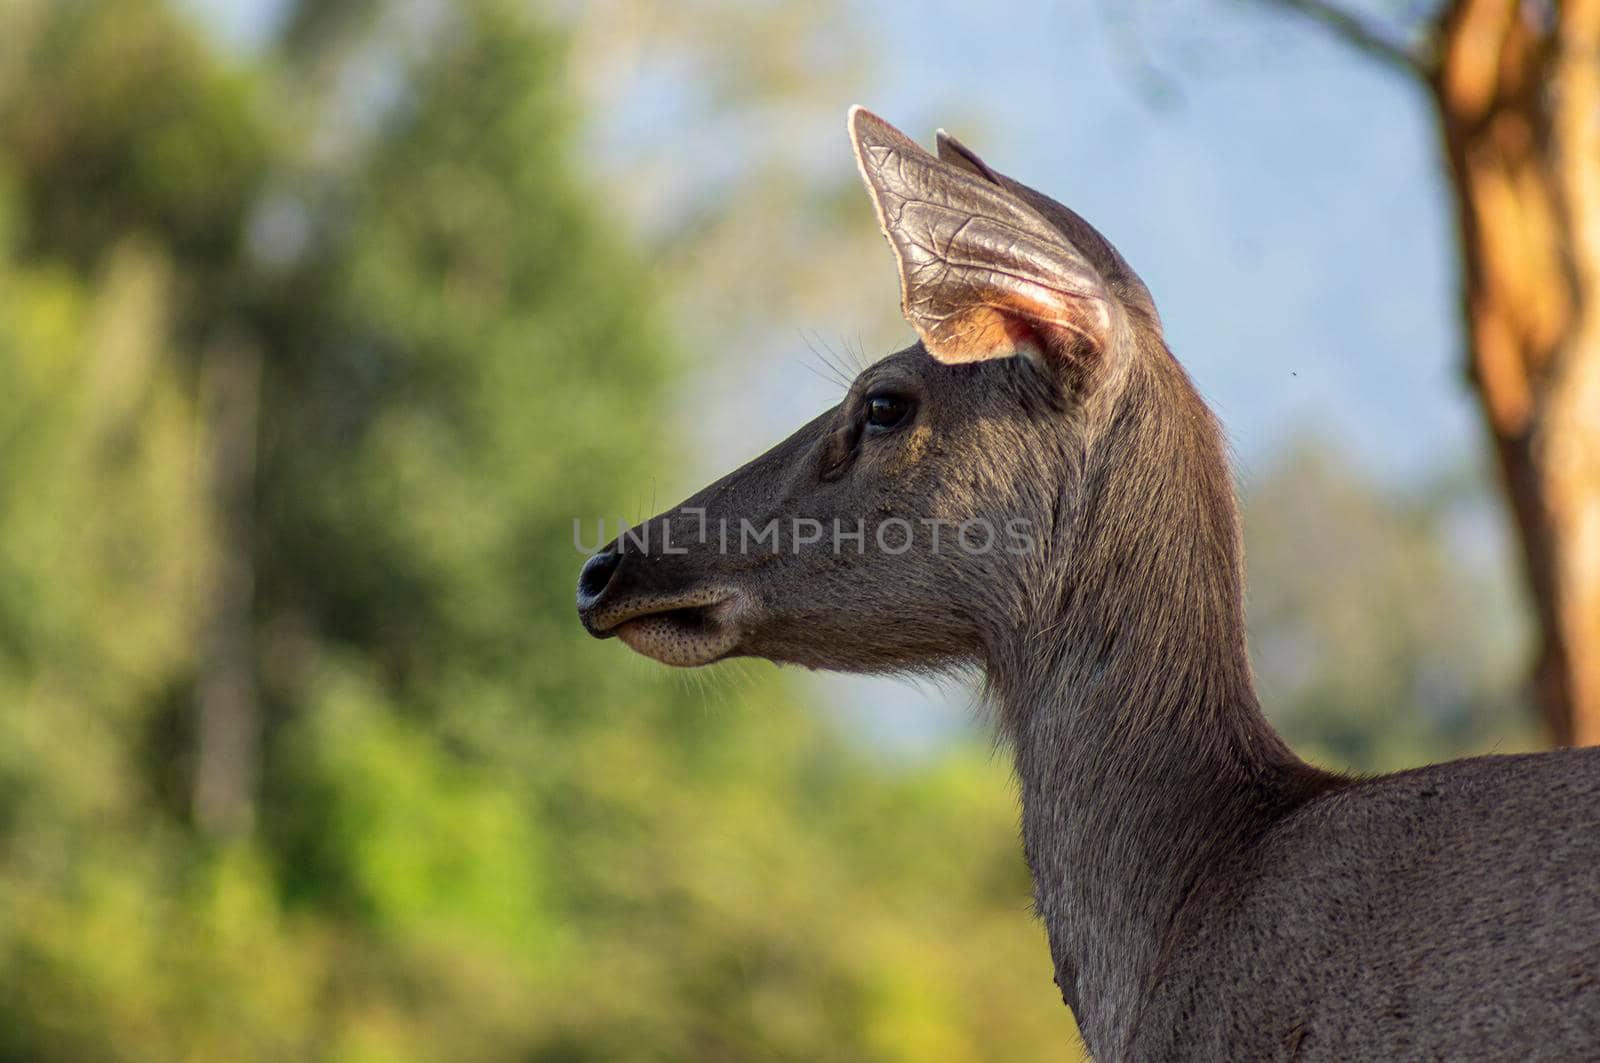 Deer head on the side. Deer are looking at something carefully. The background is a green tree.